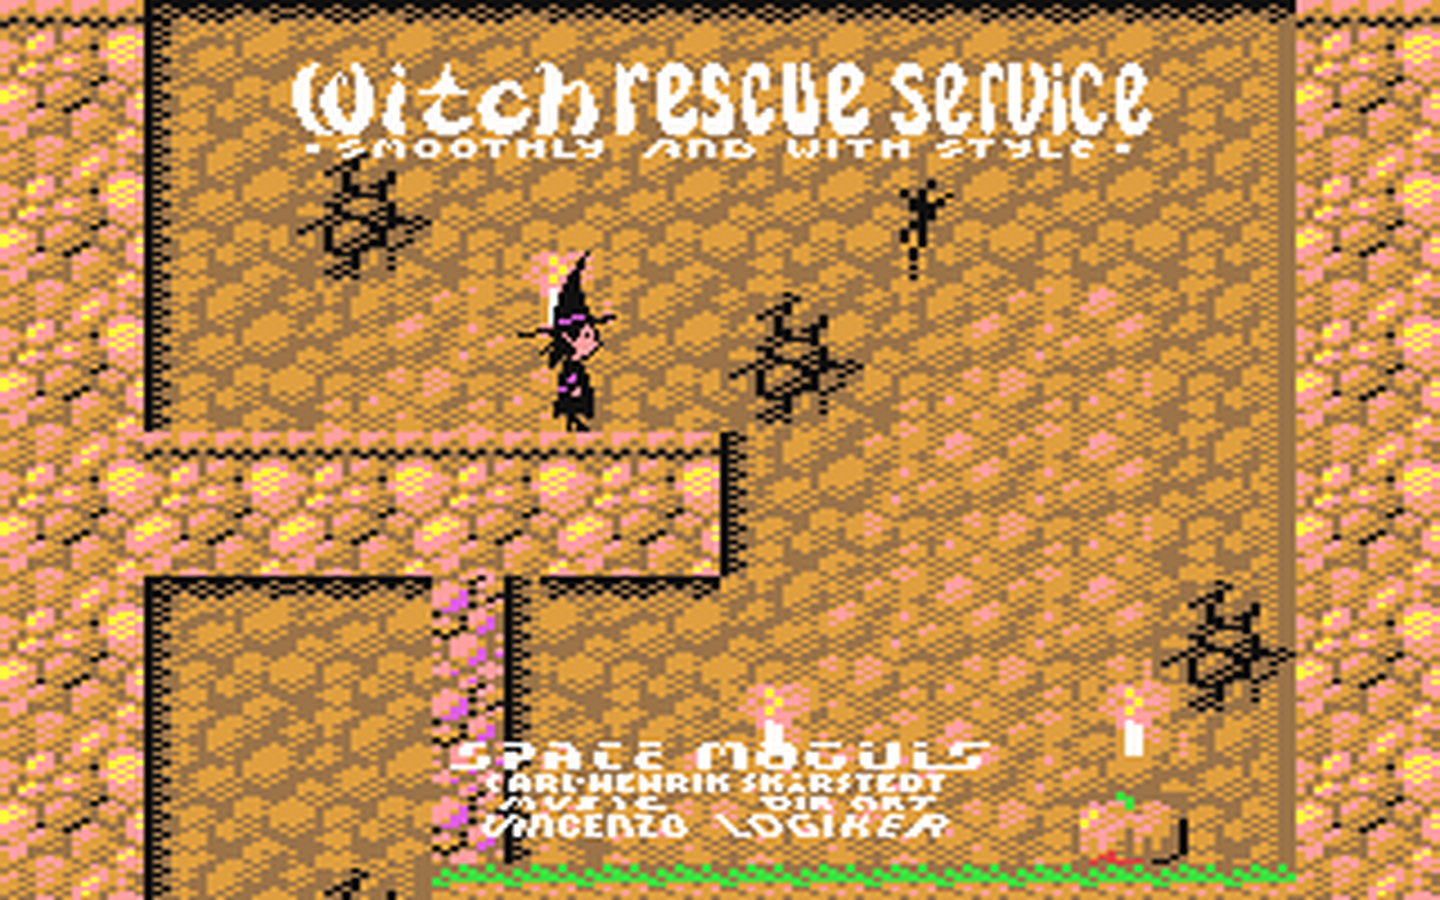 C64 GameBase Witch_Rescue_Service_-_Smoothly_and_with_Style_[Preview] (Public_Domain) 2020